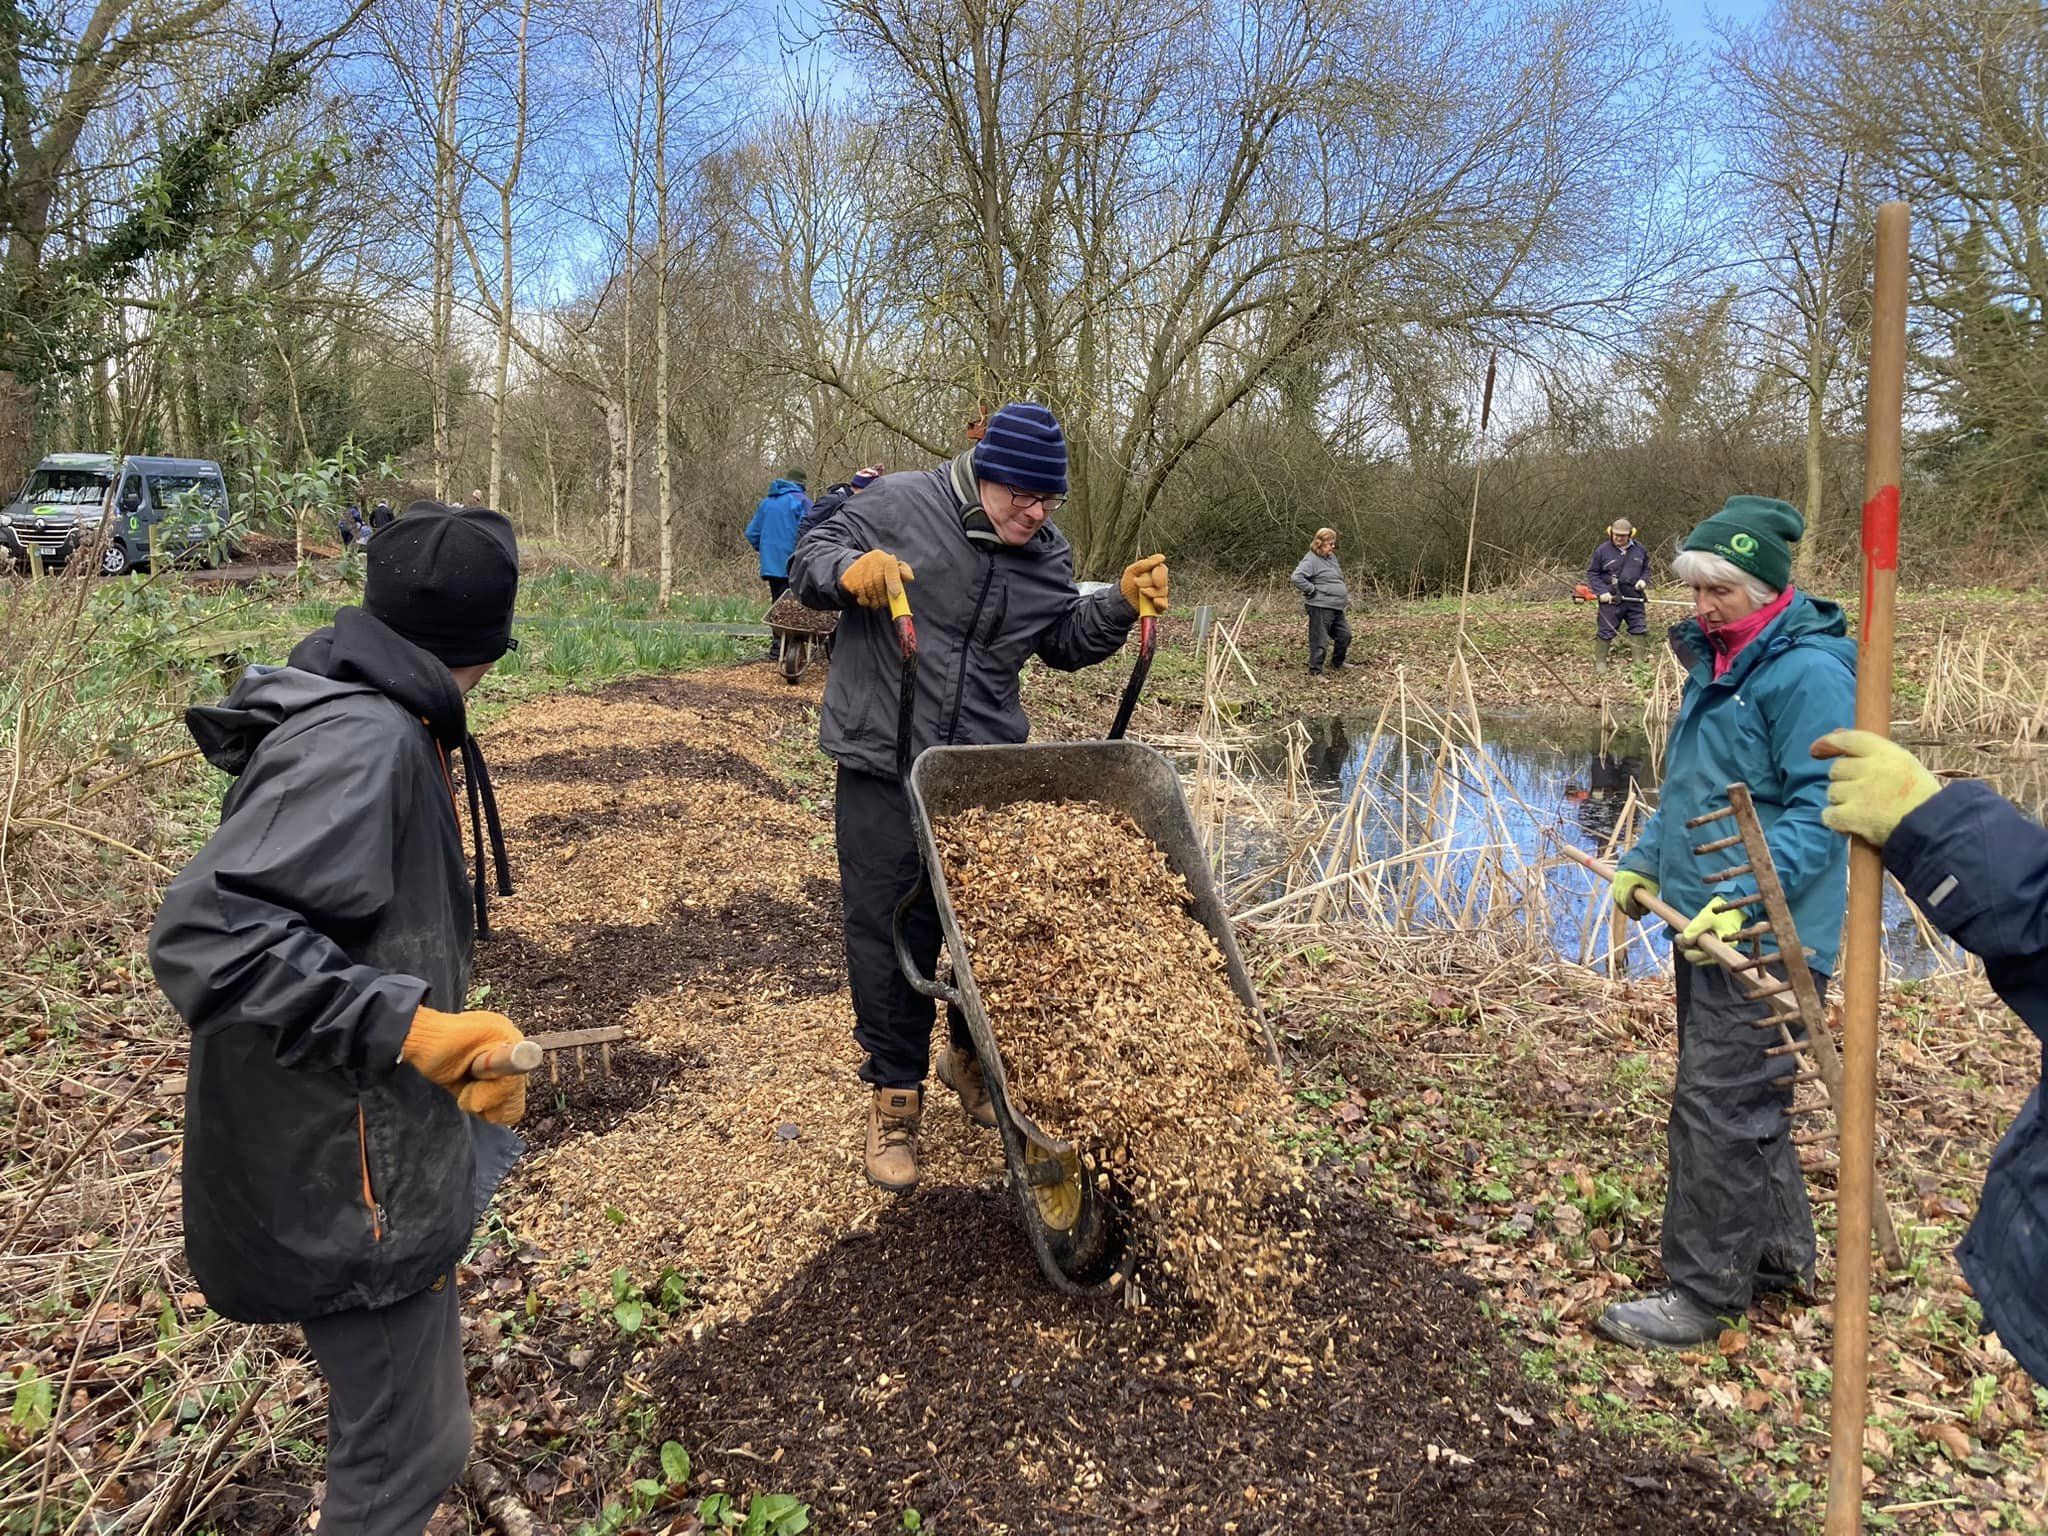 A group of people outdoors laying a woodchip path